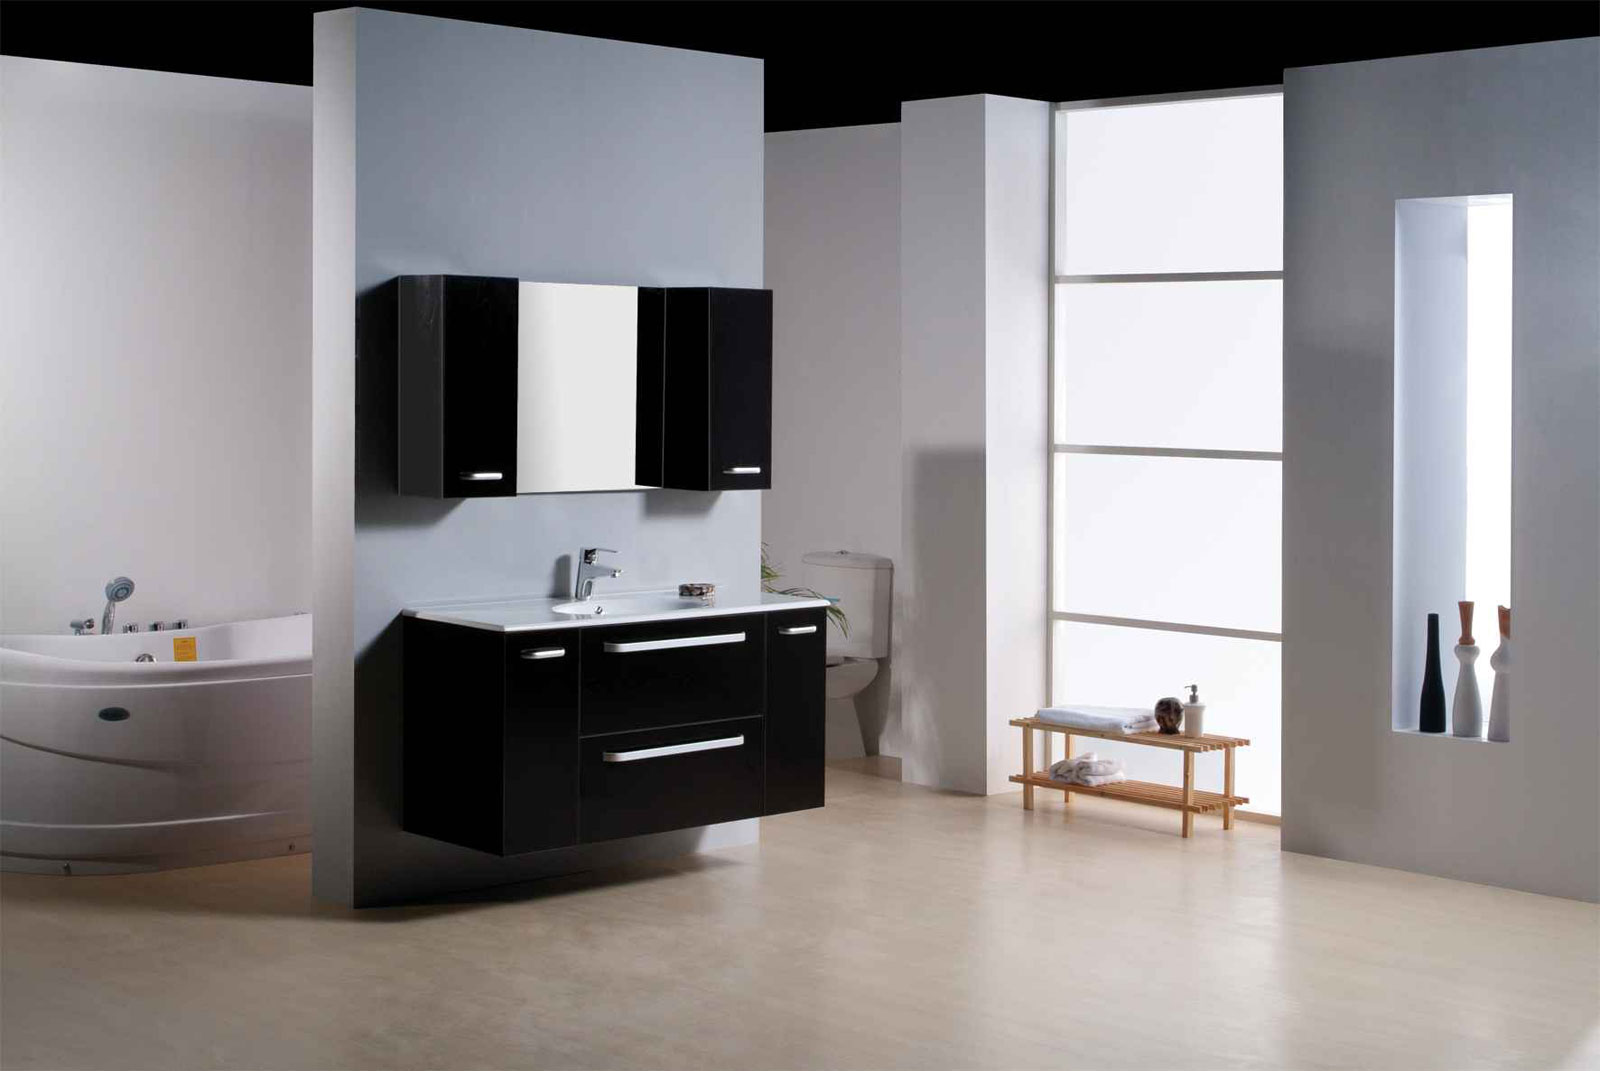 White Accent Of Dazzling White Accent Wall Color Of Modern Bathroom With Whirlpool Bathtub Furnished With Vanity Sink Added With Bathroom Wall Cabinets And Coupled By Mirror Bathroom The Best Choice For Bathroom: Bathroom Wall Cabinets